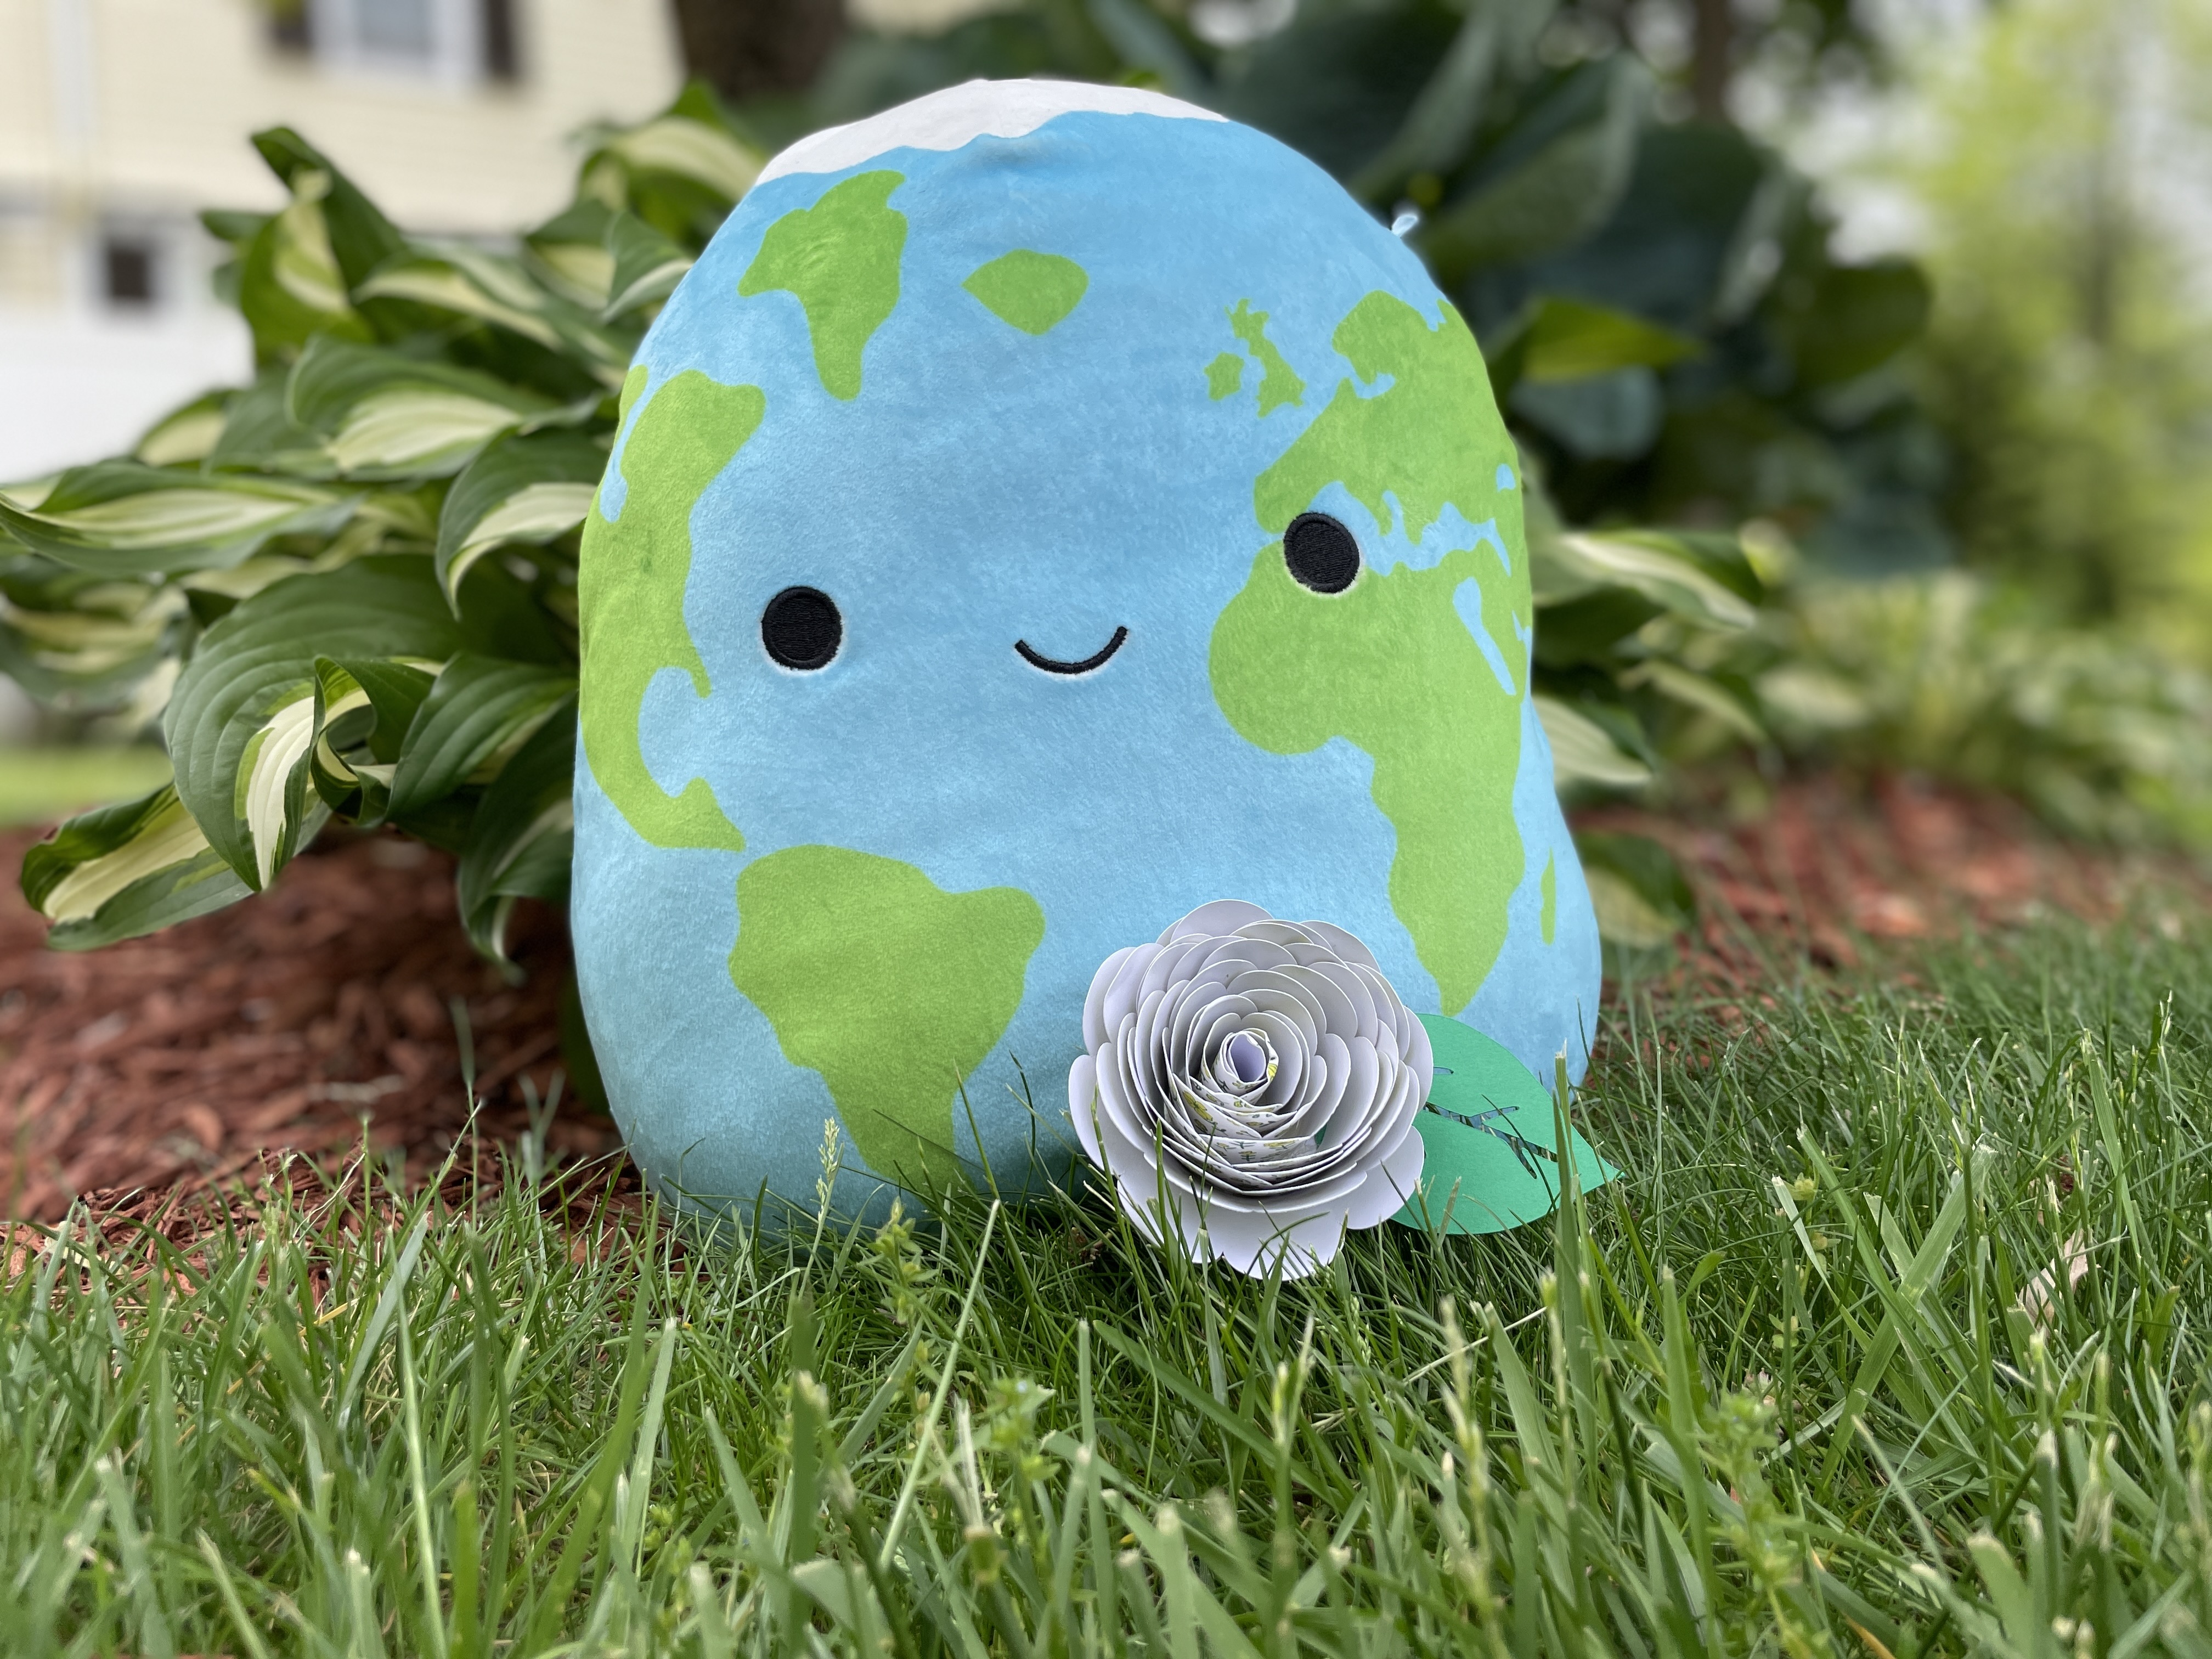 The earth in the garden